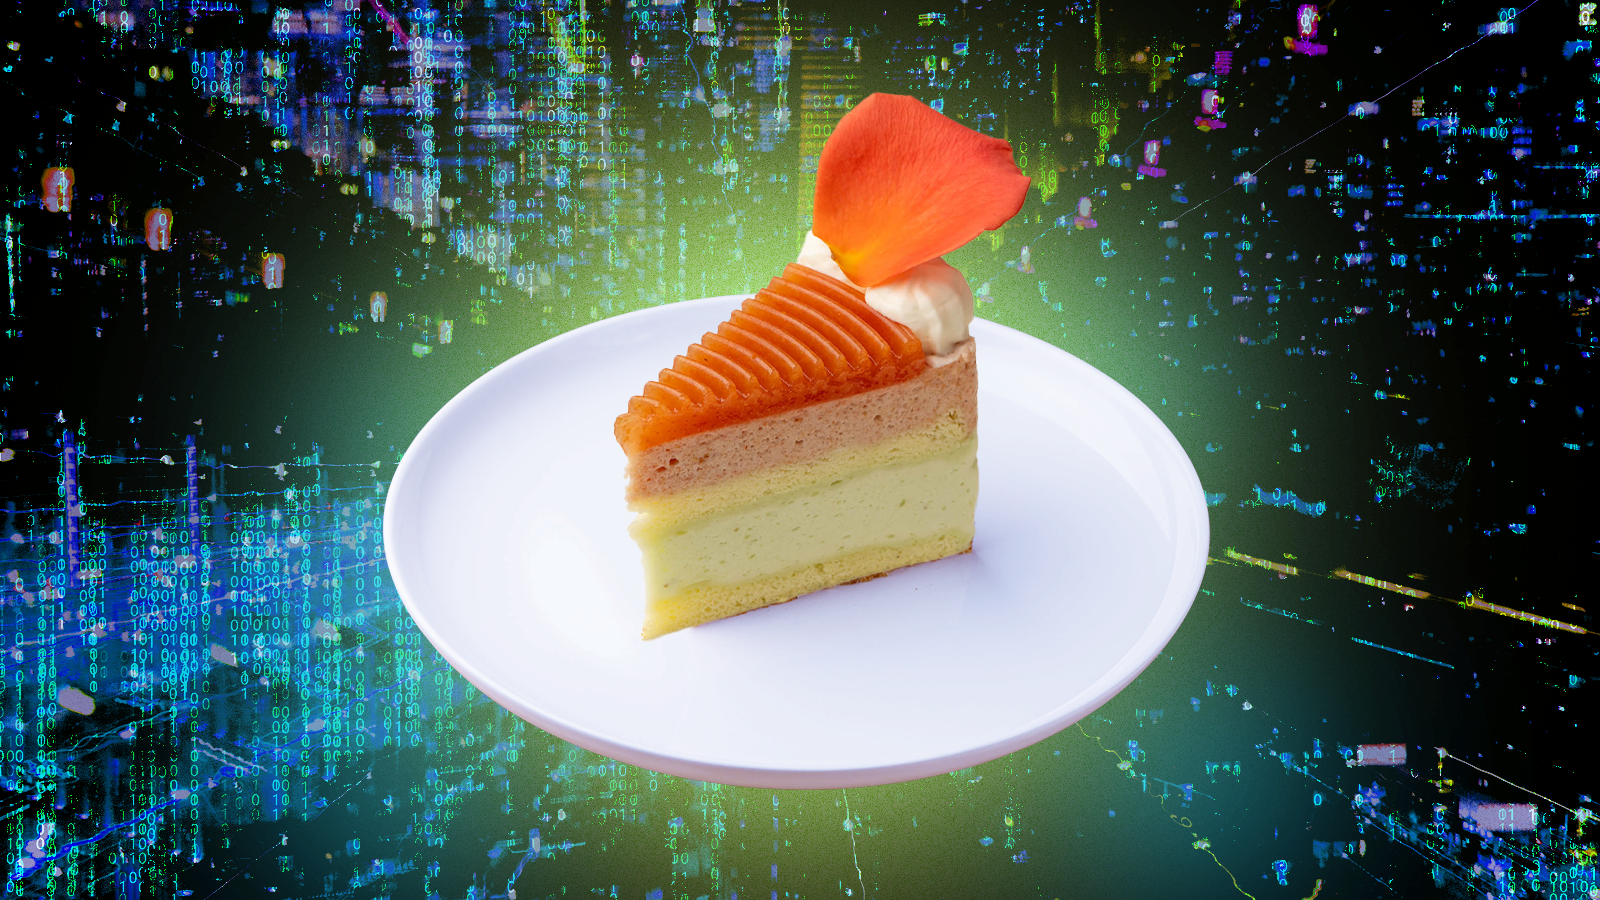 A colorful slice of cake with a matrix background.